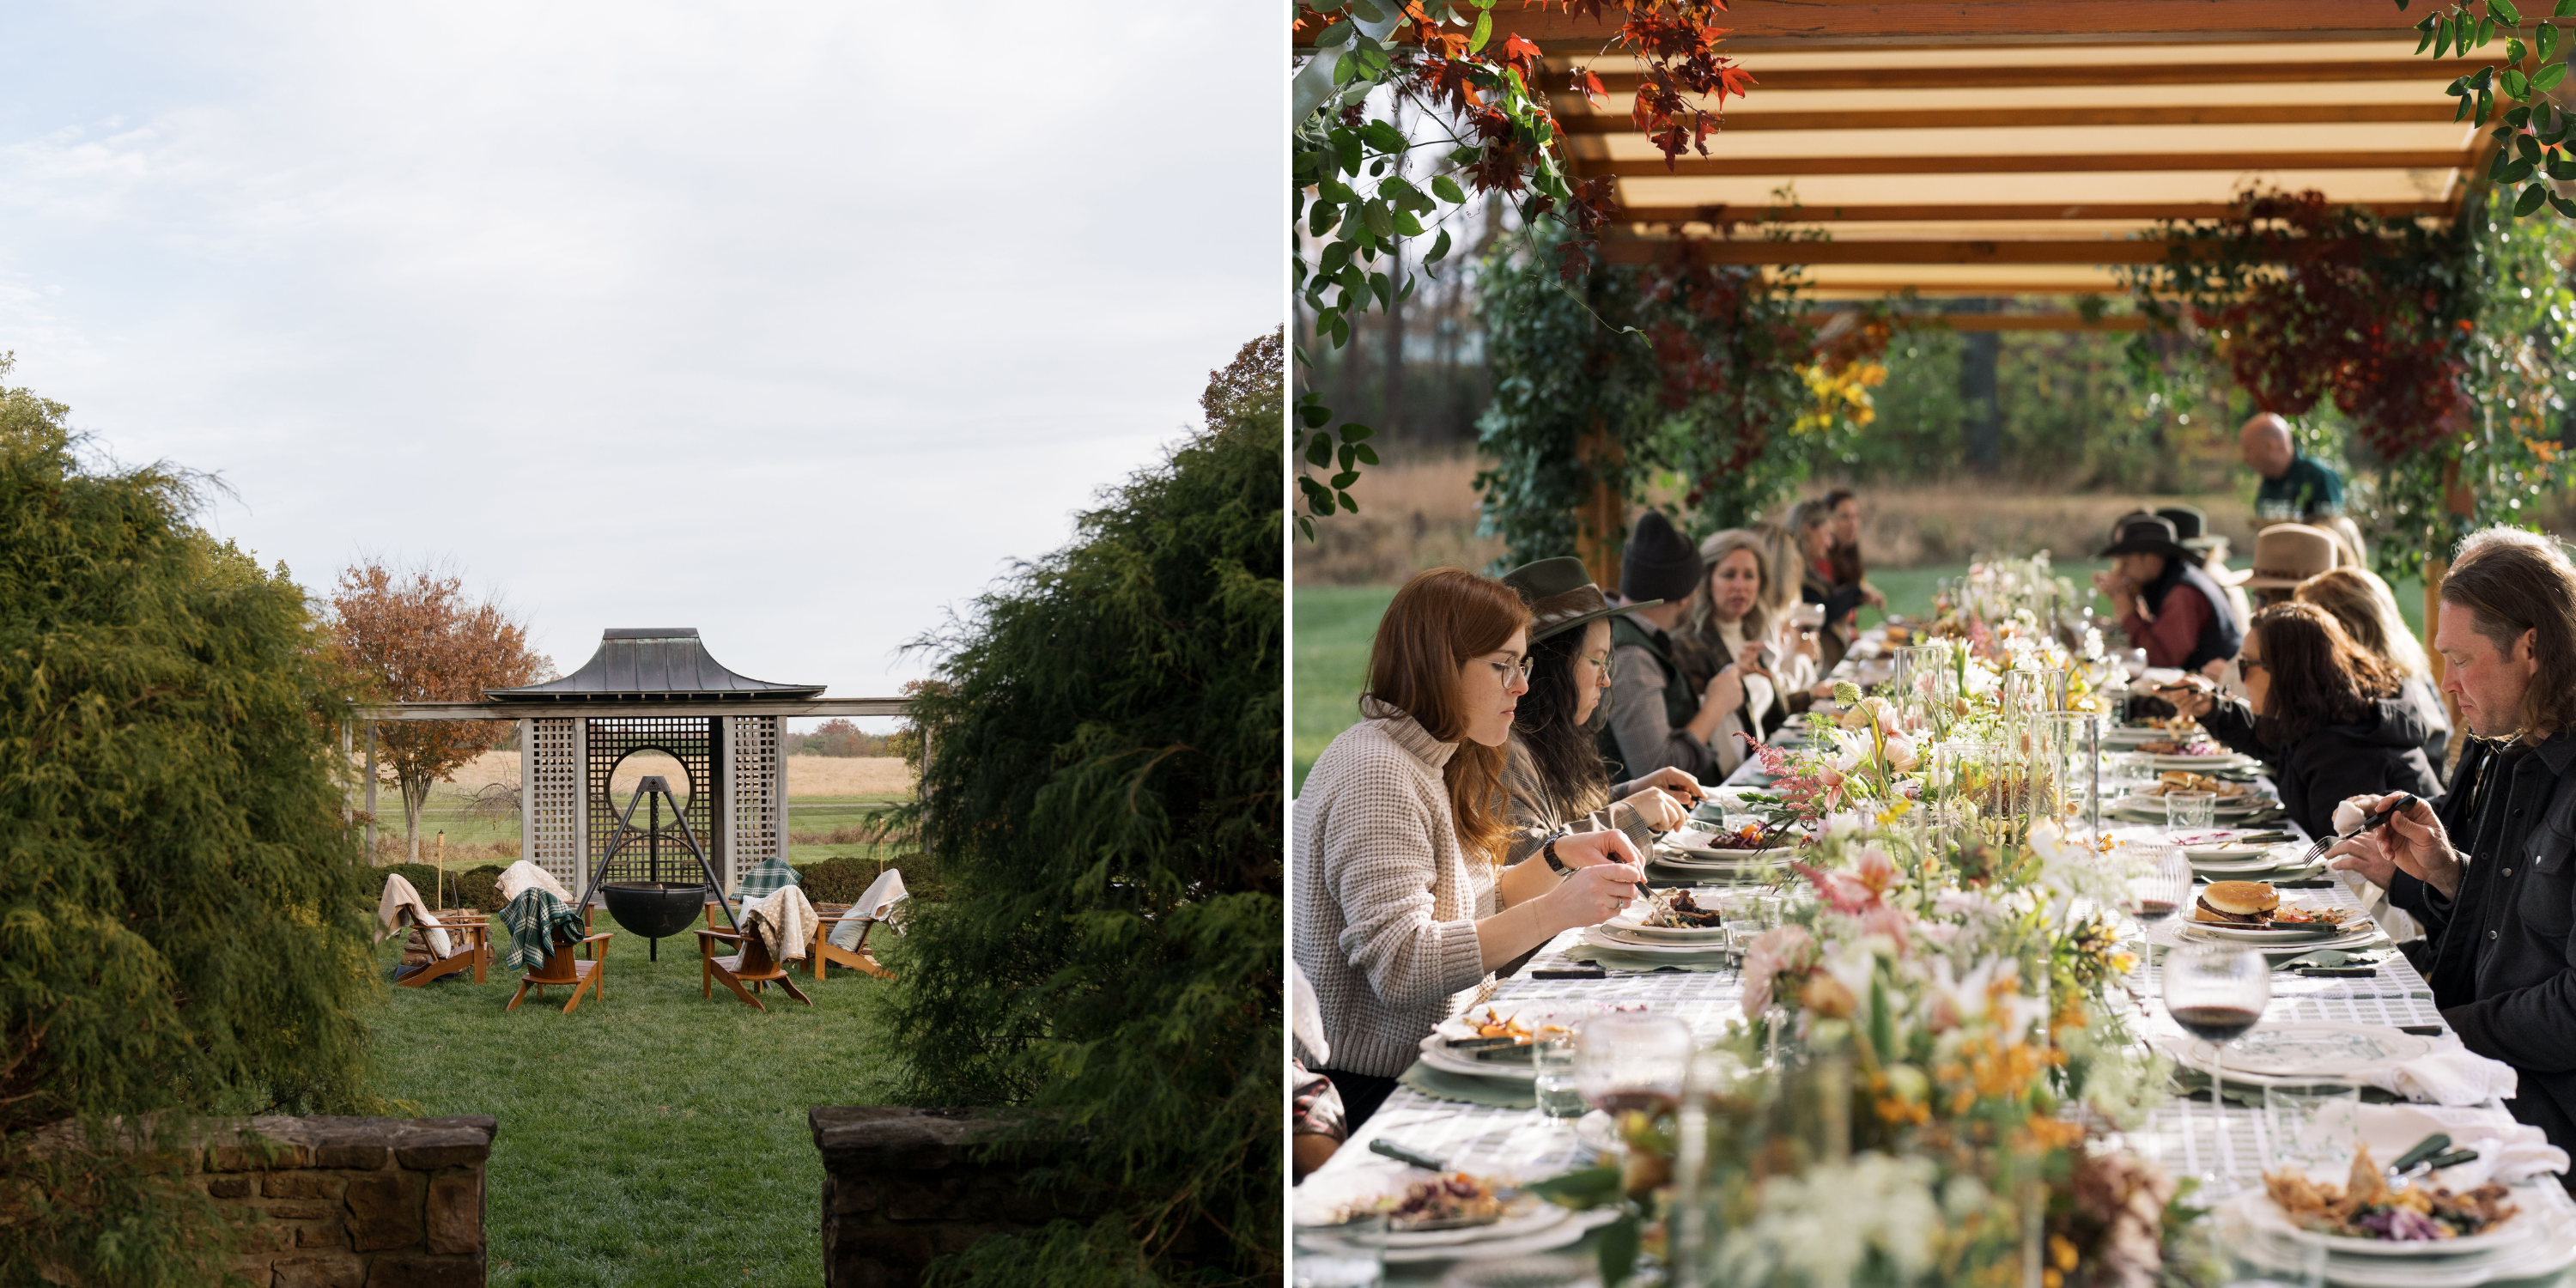 A collage of two images: A fire pit with chairs around it in a garden; diners at an al fresco table